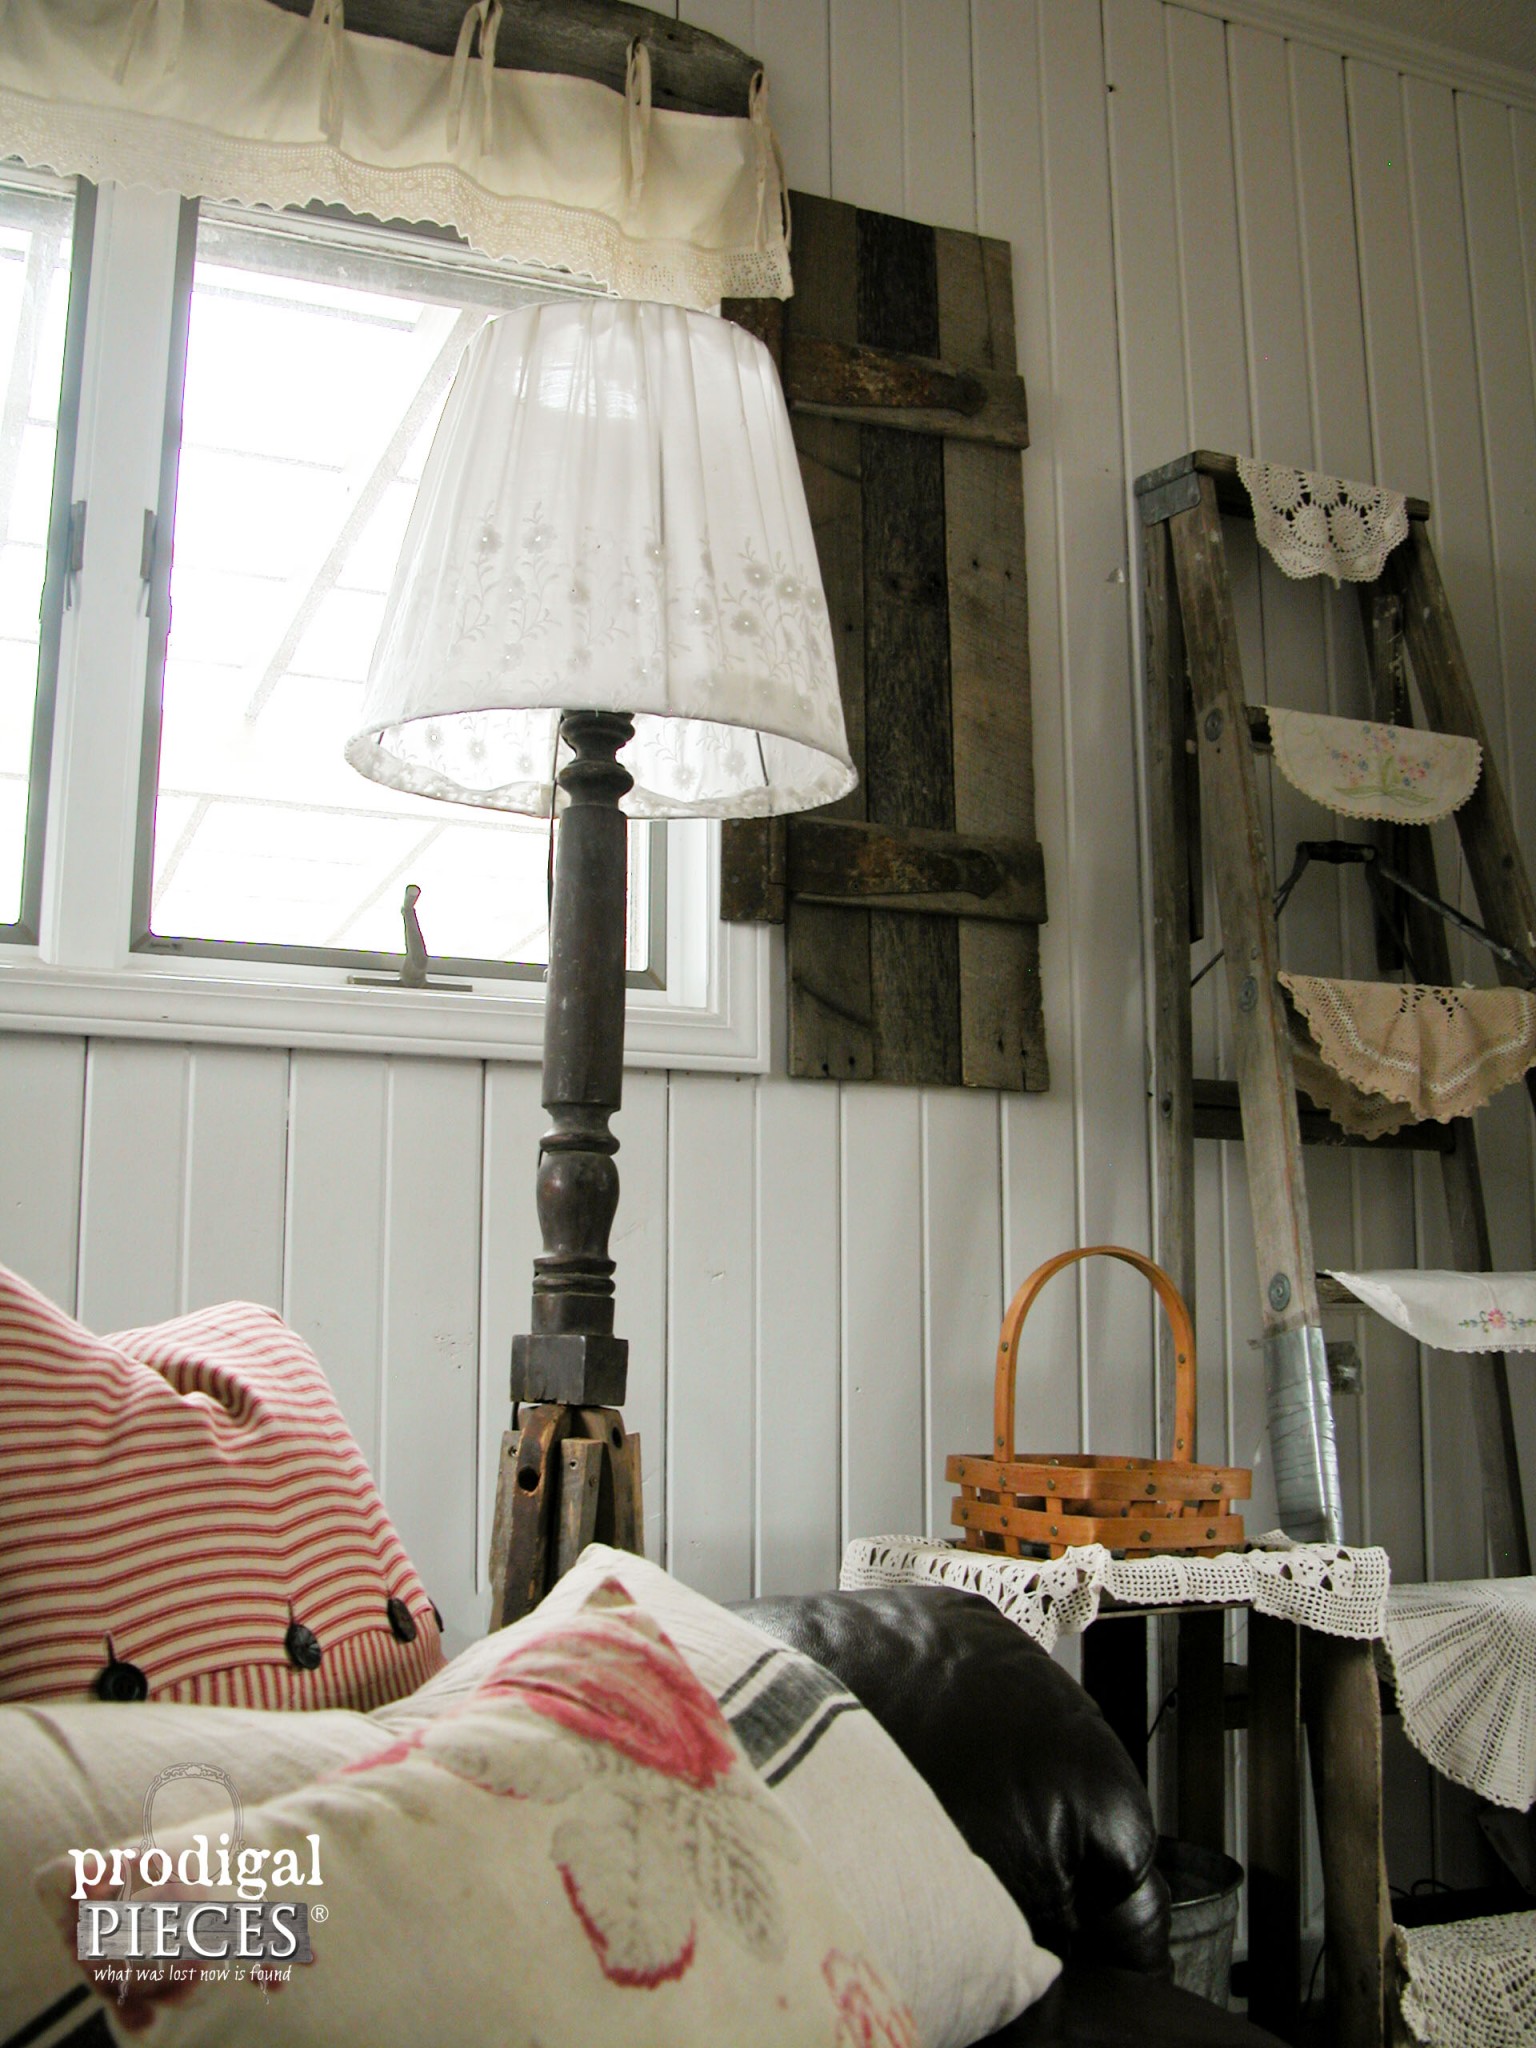 Rustic Floor Lamp from Repurposed Antiques | Prodigal Pieces | www.prodigalpieces.com